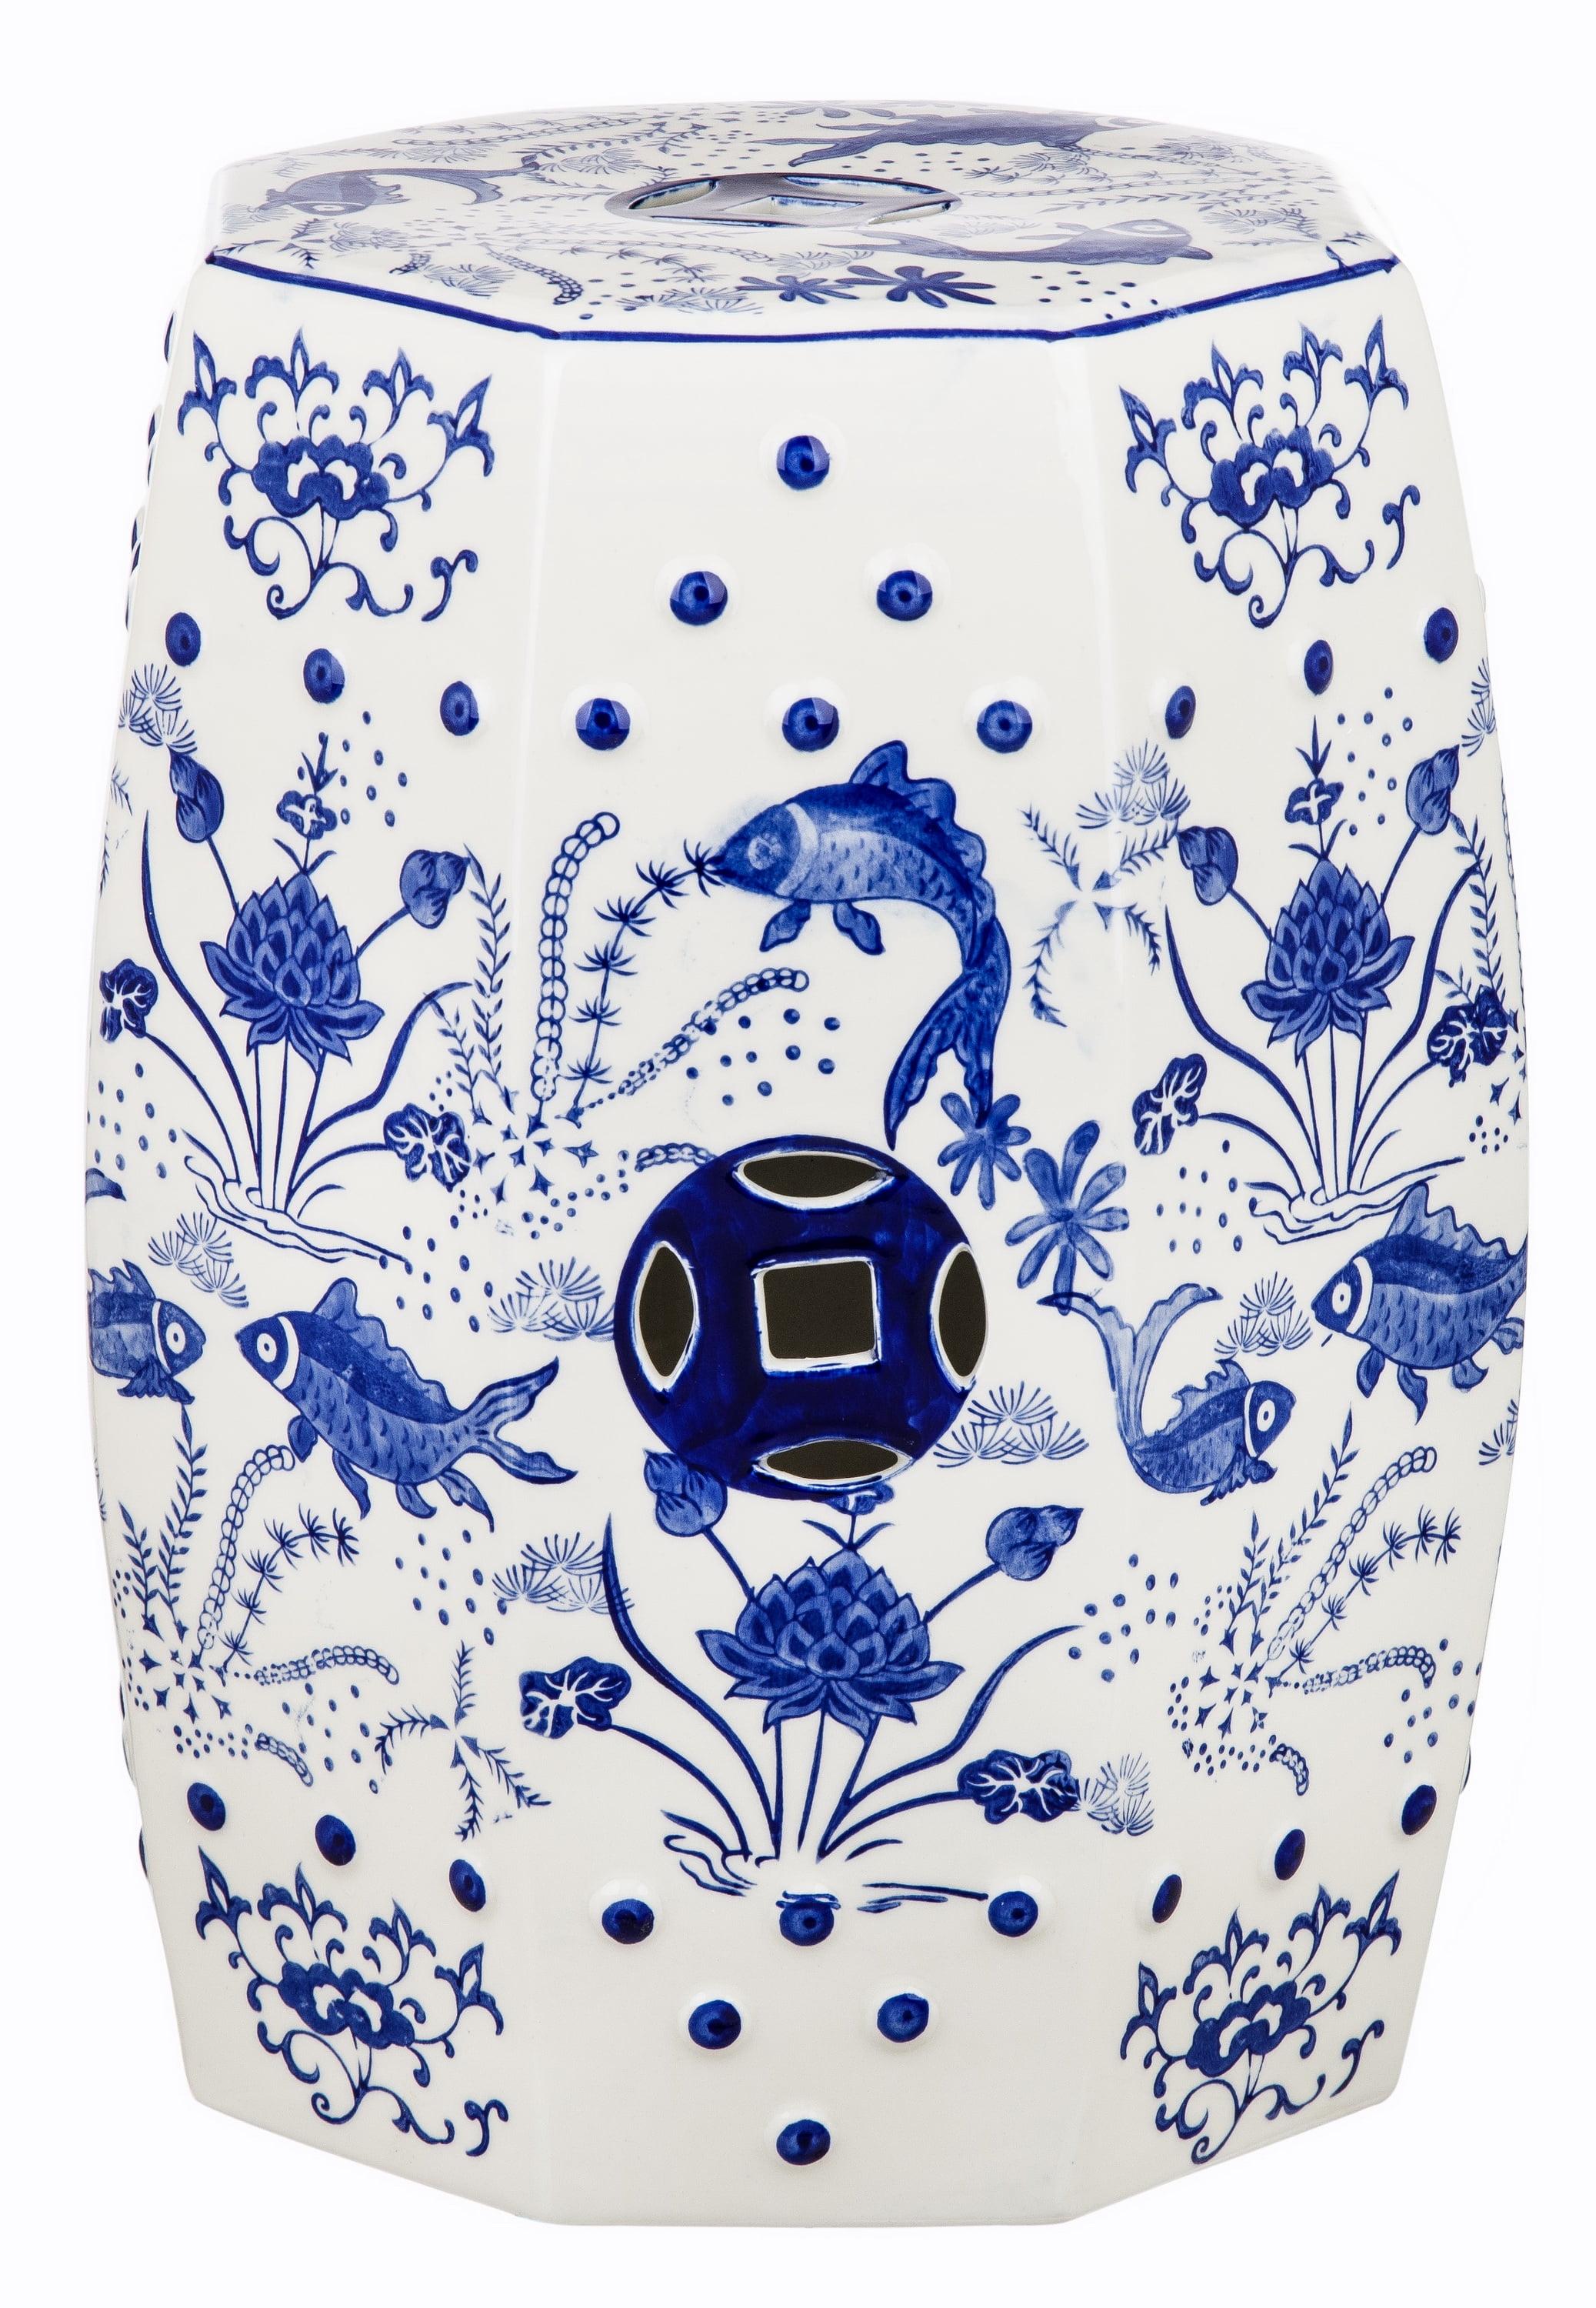 Cloud 9 Modern Chinoiserie Blue and White Ceramic Garden Stool